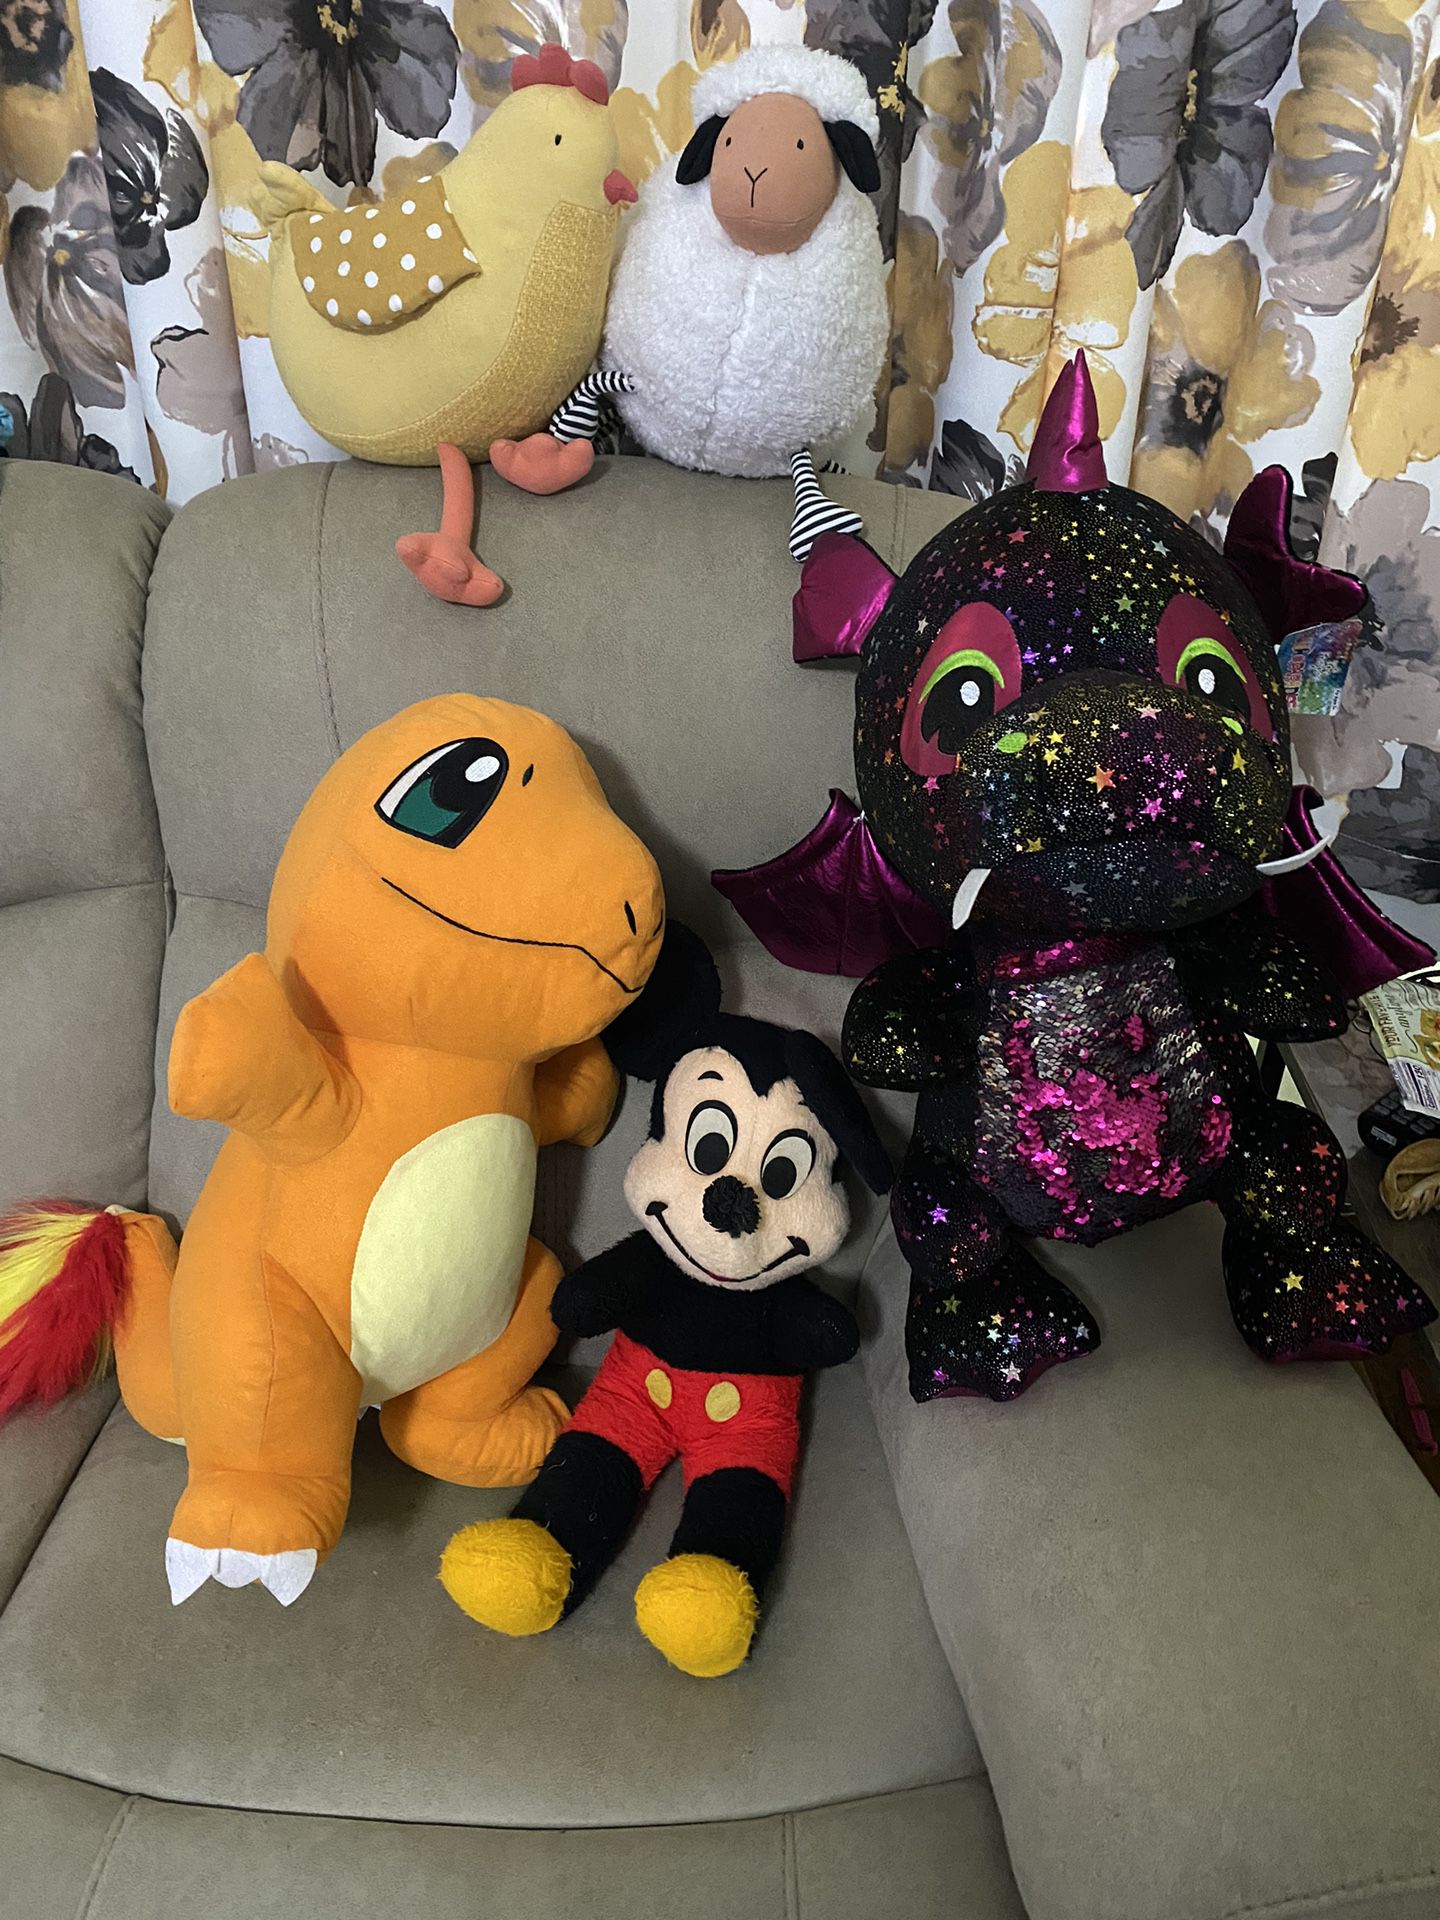 Lot of large Stuffed Animals. $10 Each or $20 Takes All